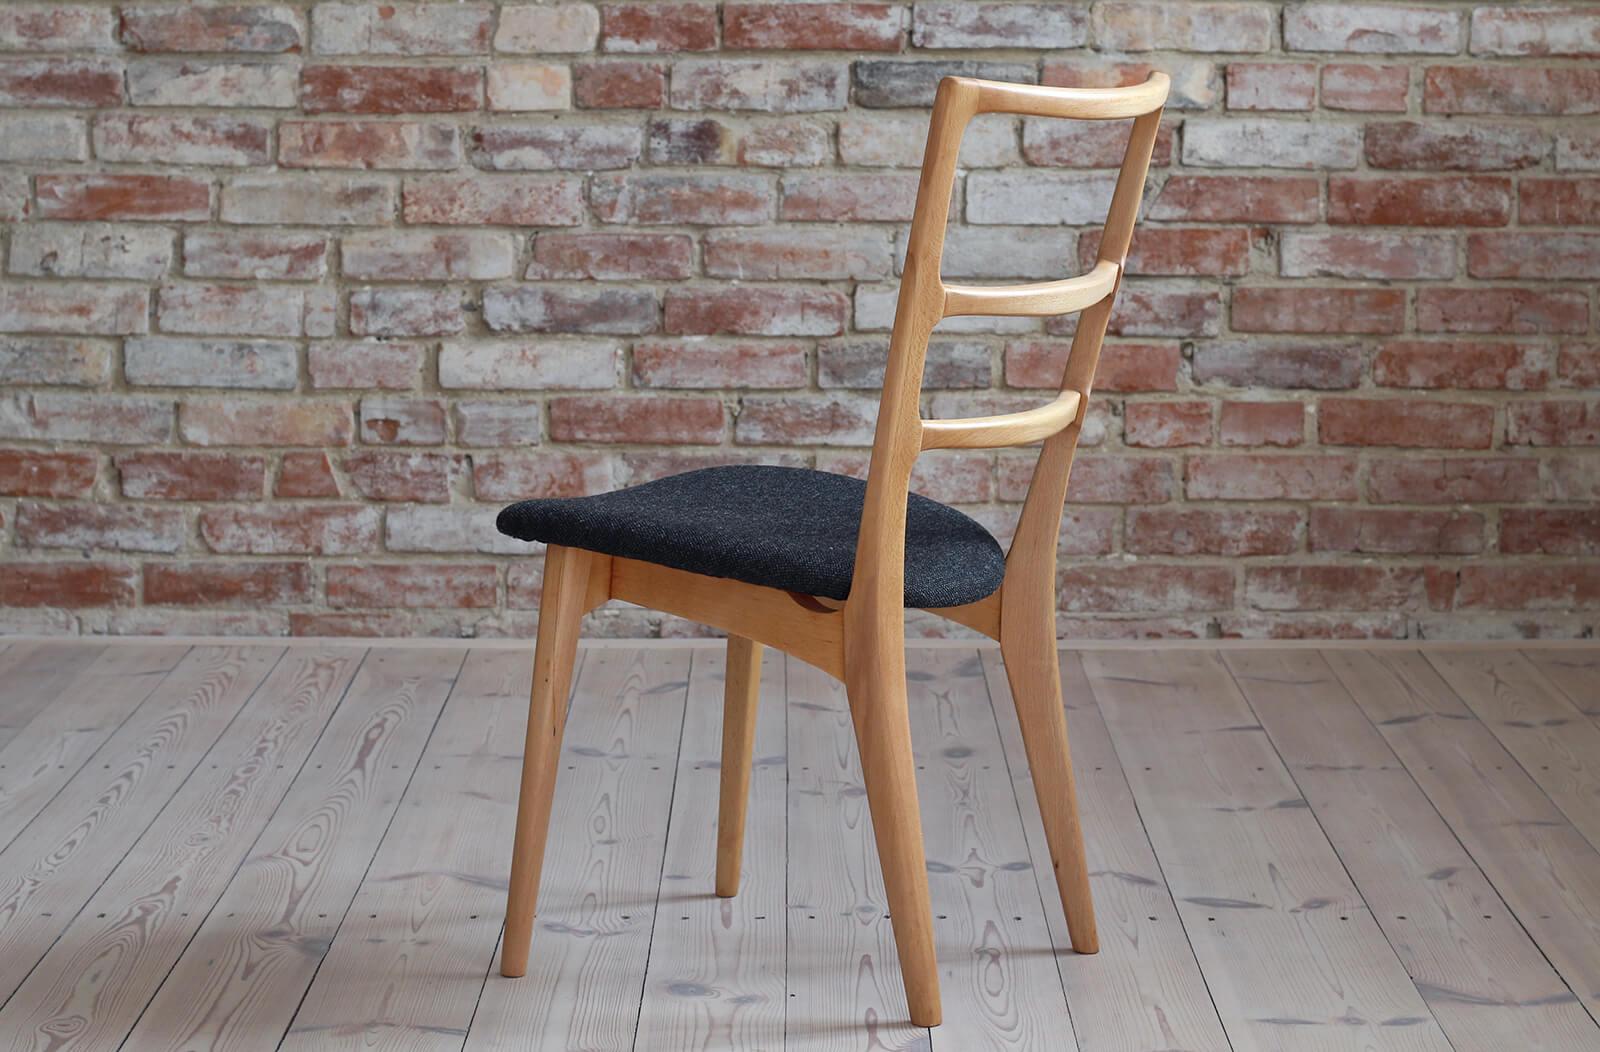 Mid-20th Century Set of 6 Dining Chairs by Marian Grabiński, Midcentury, Reupholstered in Kvadrat